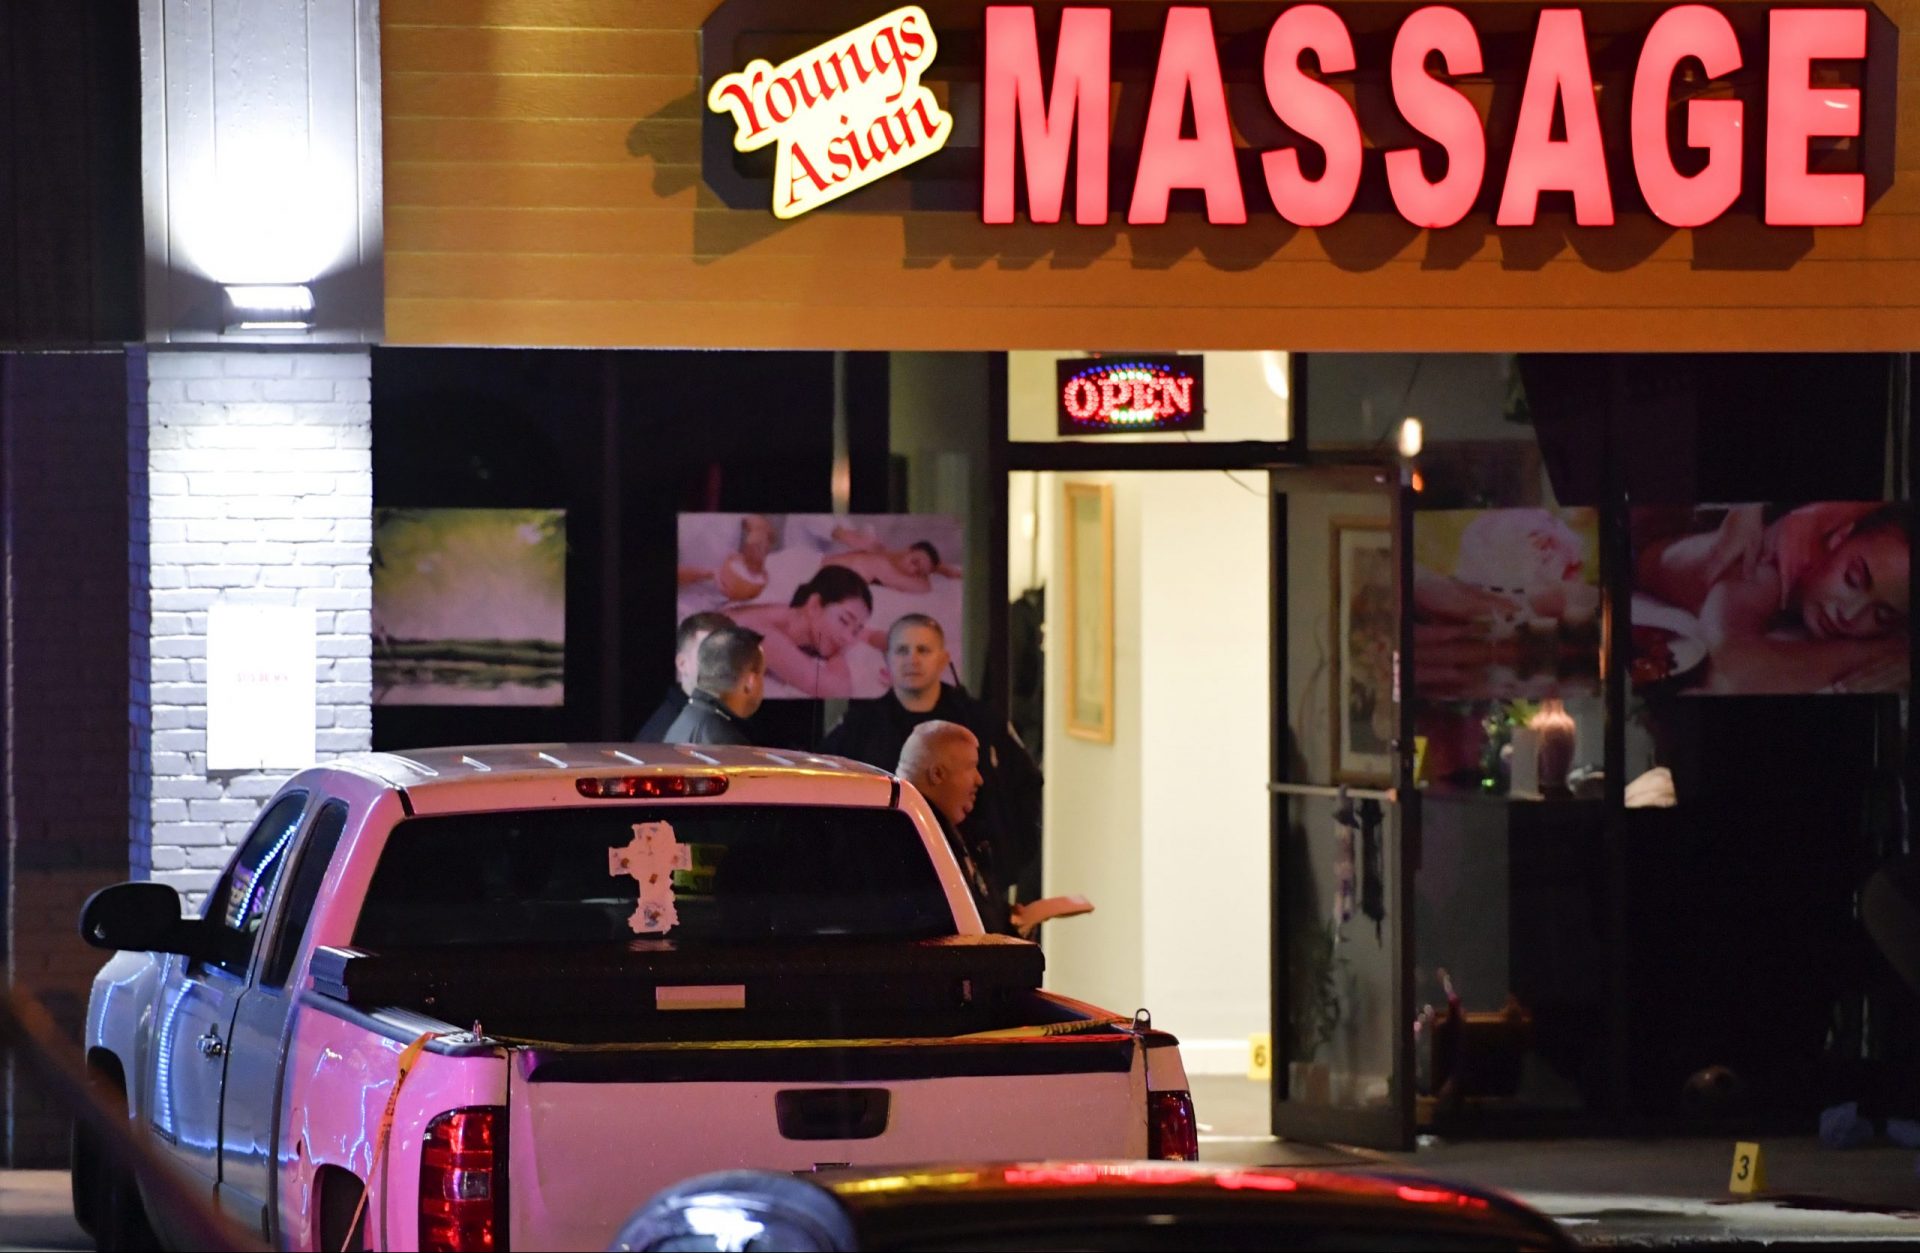 Authorities investigate a fatal shooting at a massage parlor, late Tuesday, March 16, 2021, in Acworth, Ga. Officials say 21-year-old Robert Aaron Long, of Woodstock, Georgia, has been captured hours after multiple people were killed in shootings at three Atlanta-area massage parlors.